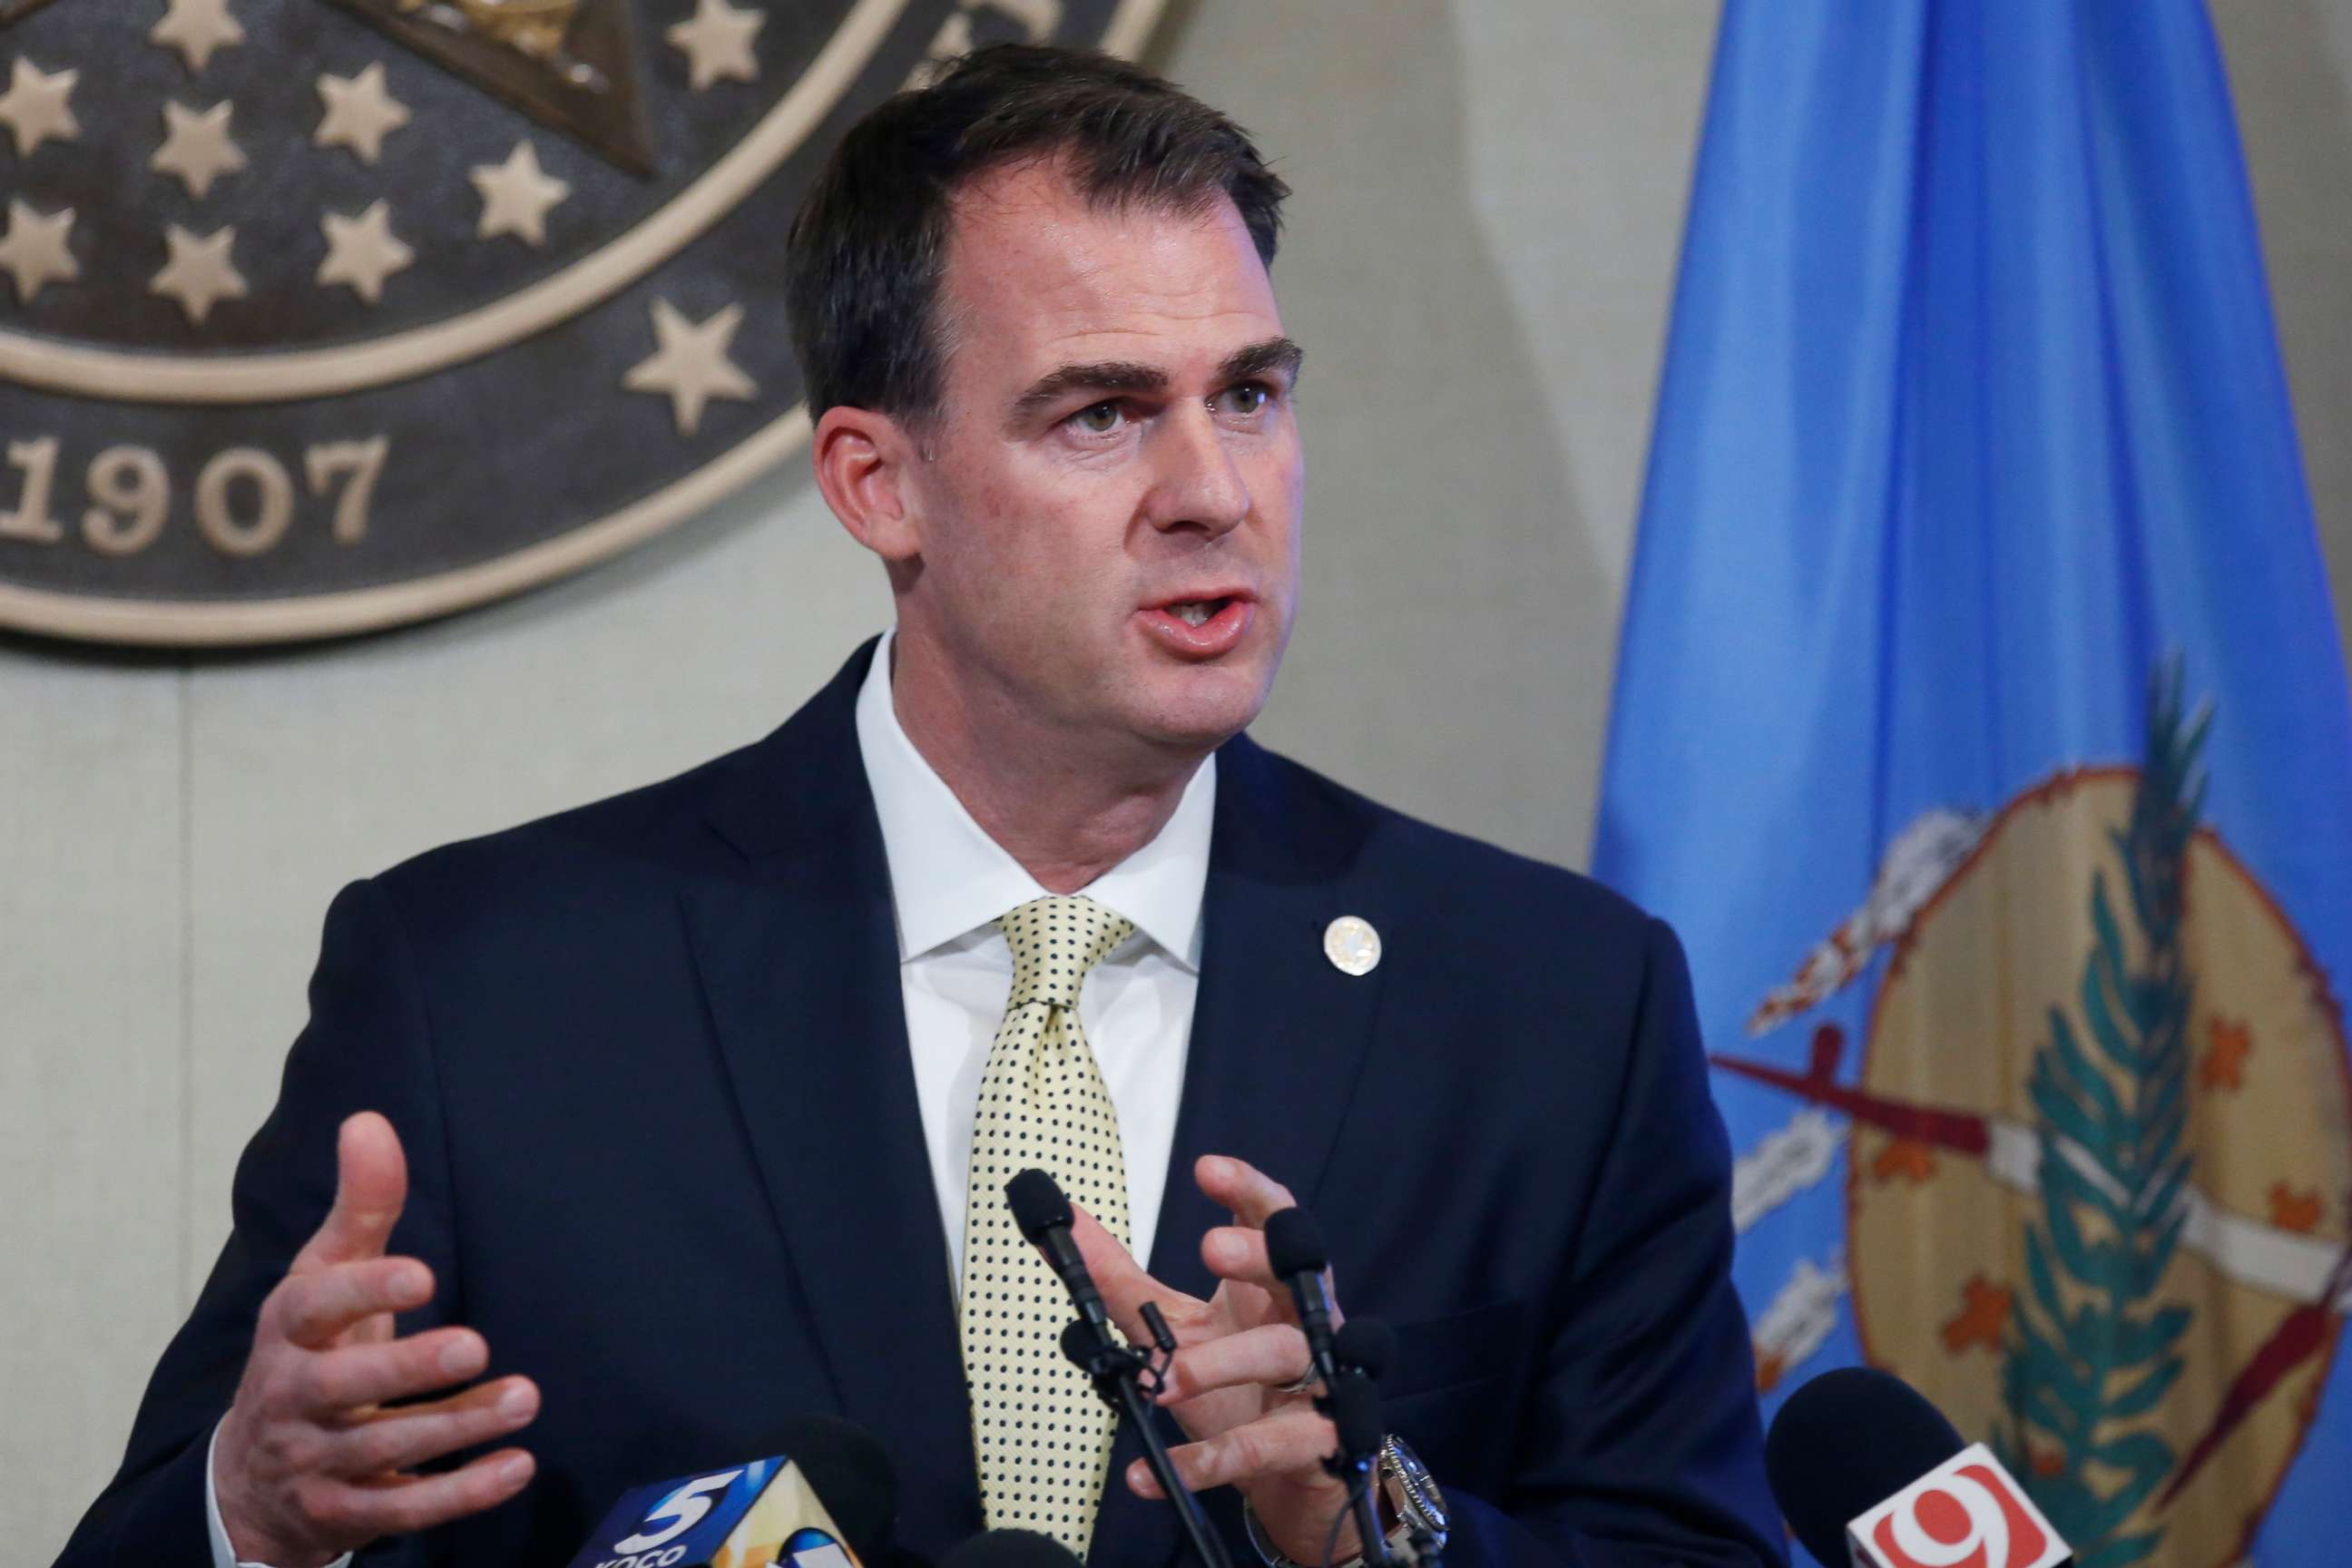 PHOTO: Oklahoma Gov. Kevin Stitt speaks during a news conference in Oklahoma City, May 6, 2020.